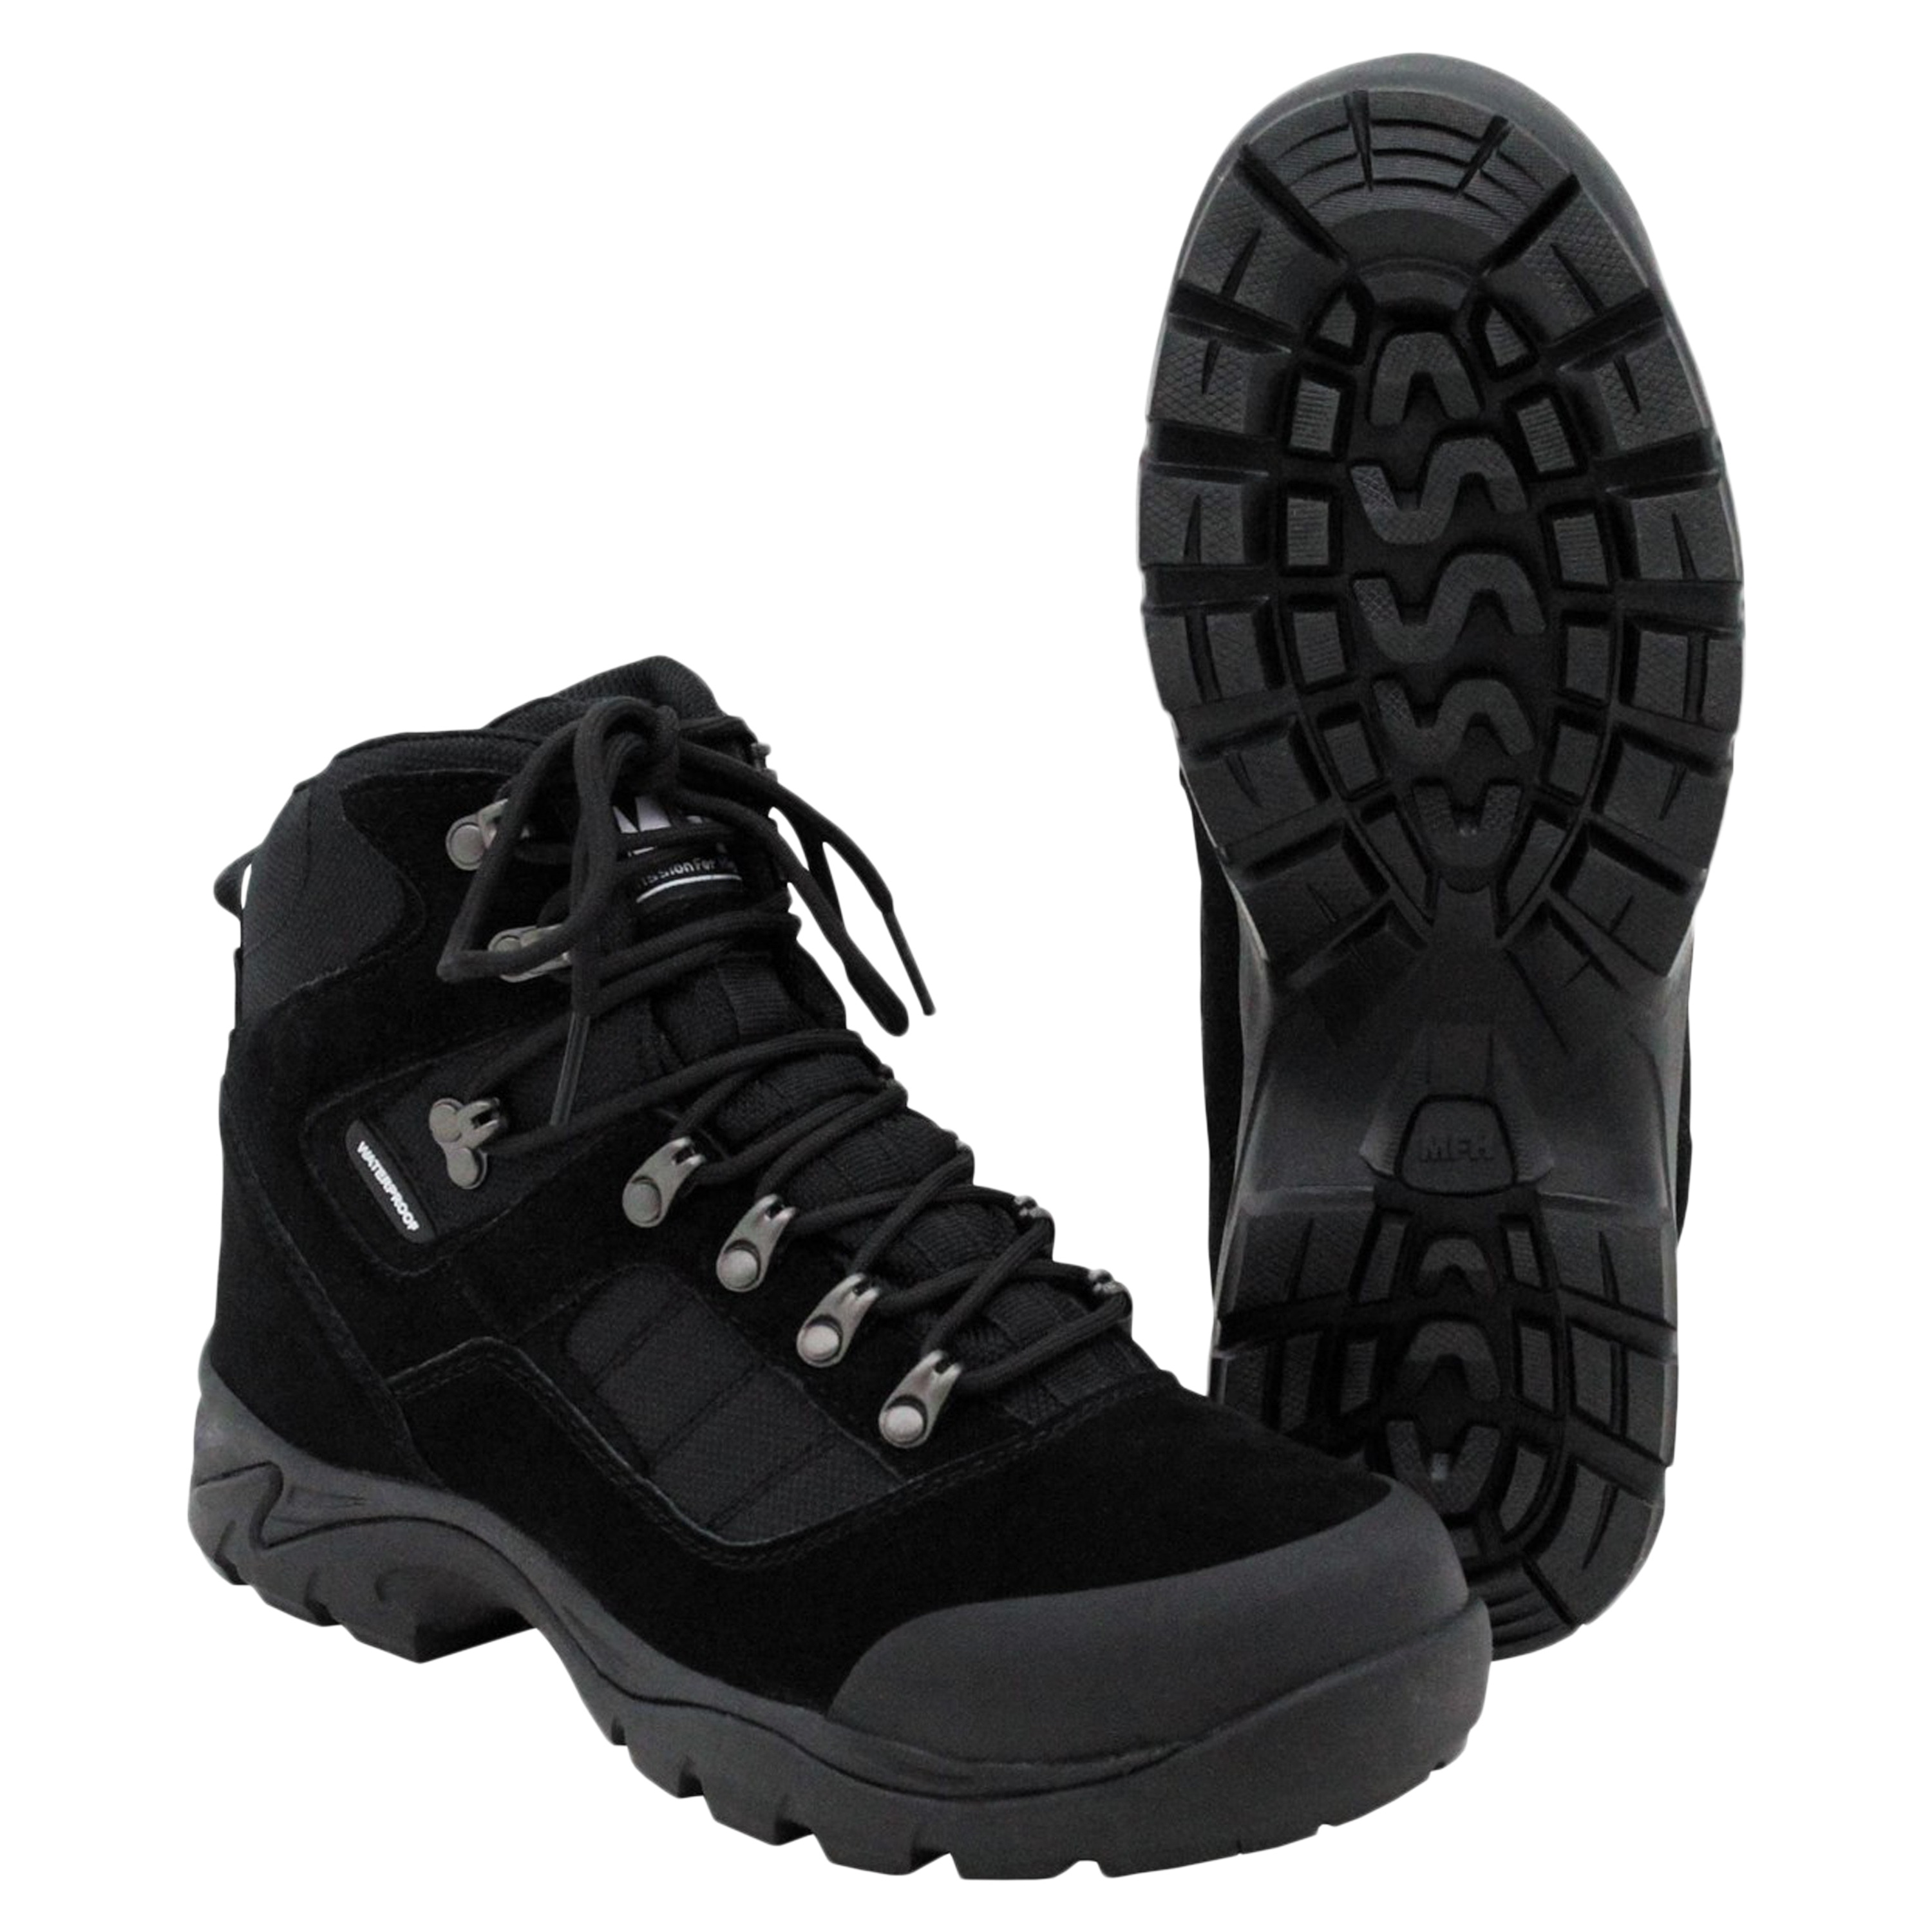 Purchase the MFH Tactical Boots Security black by ASMC